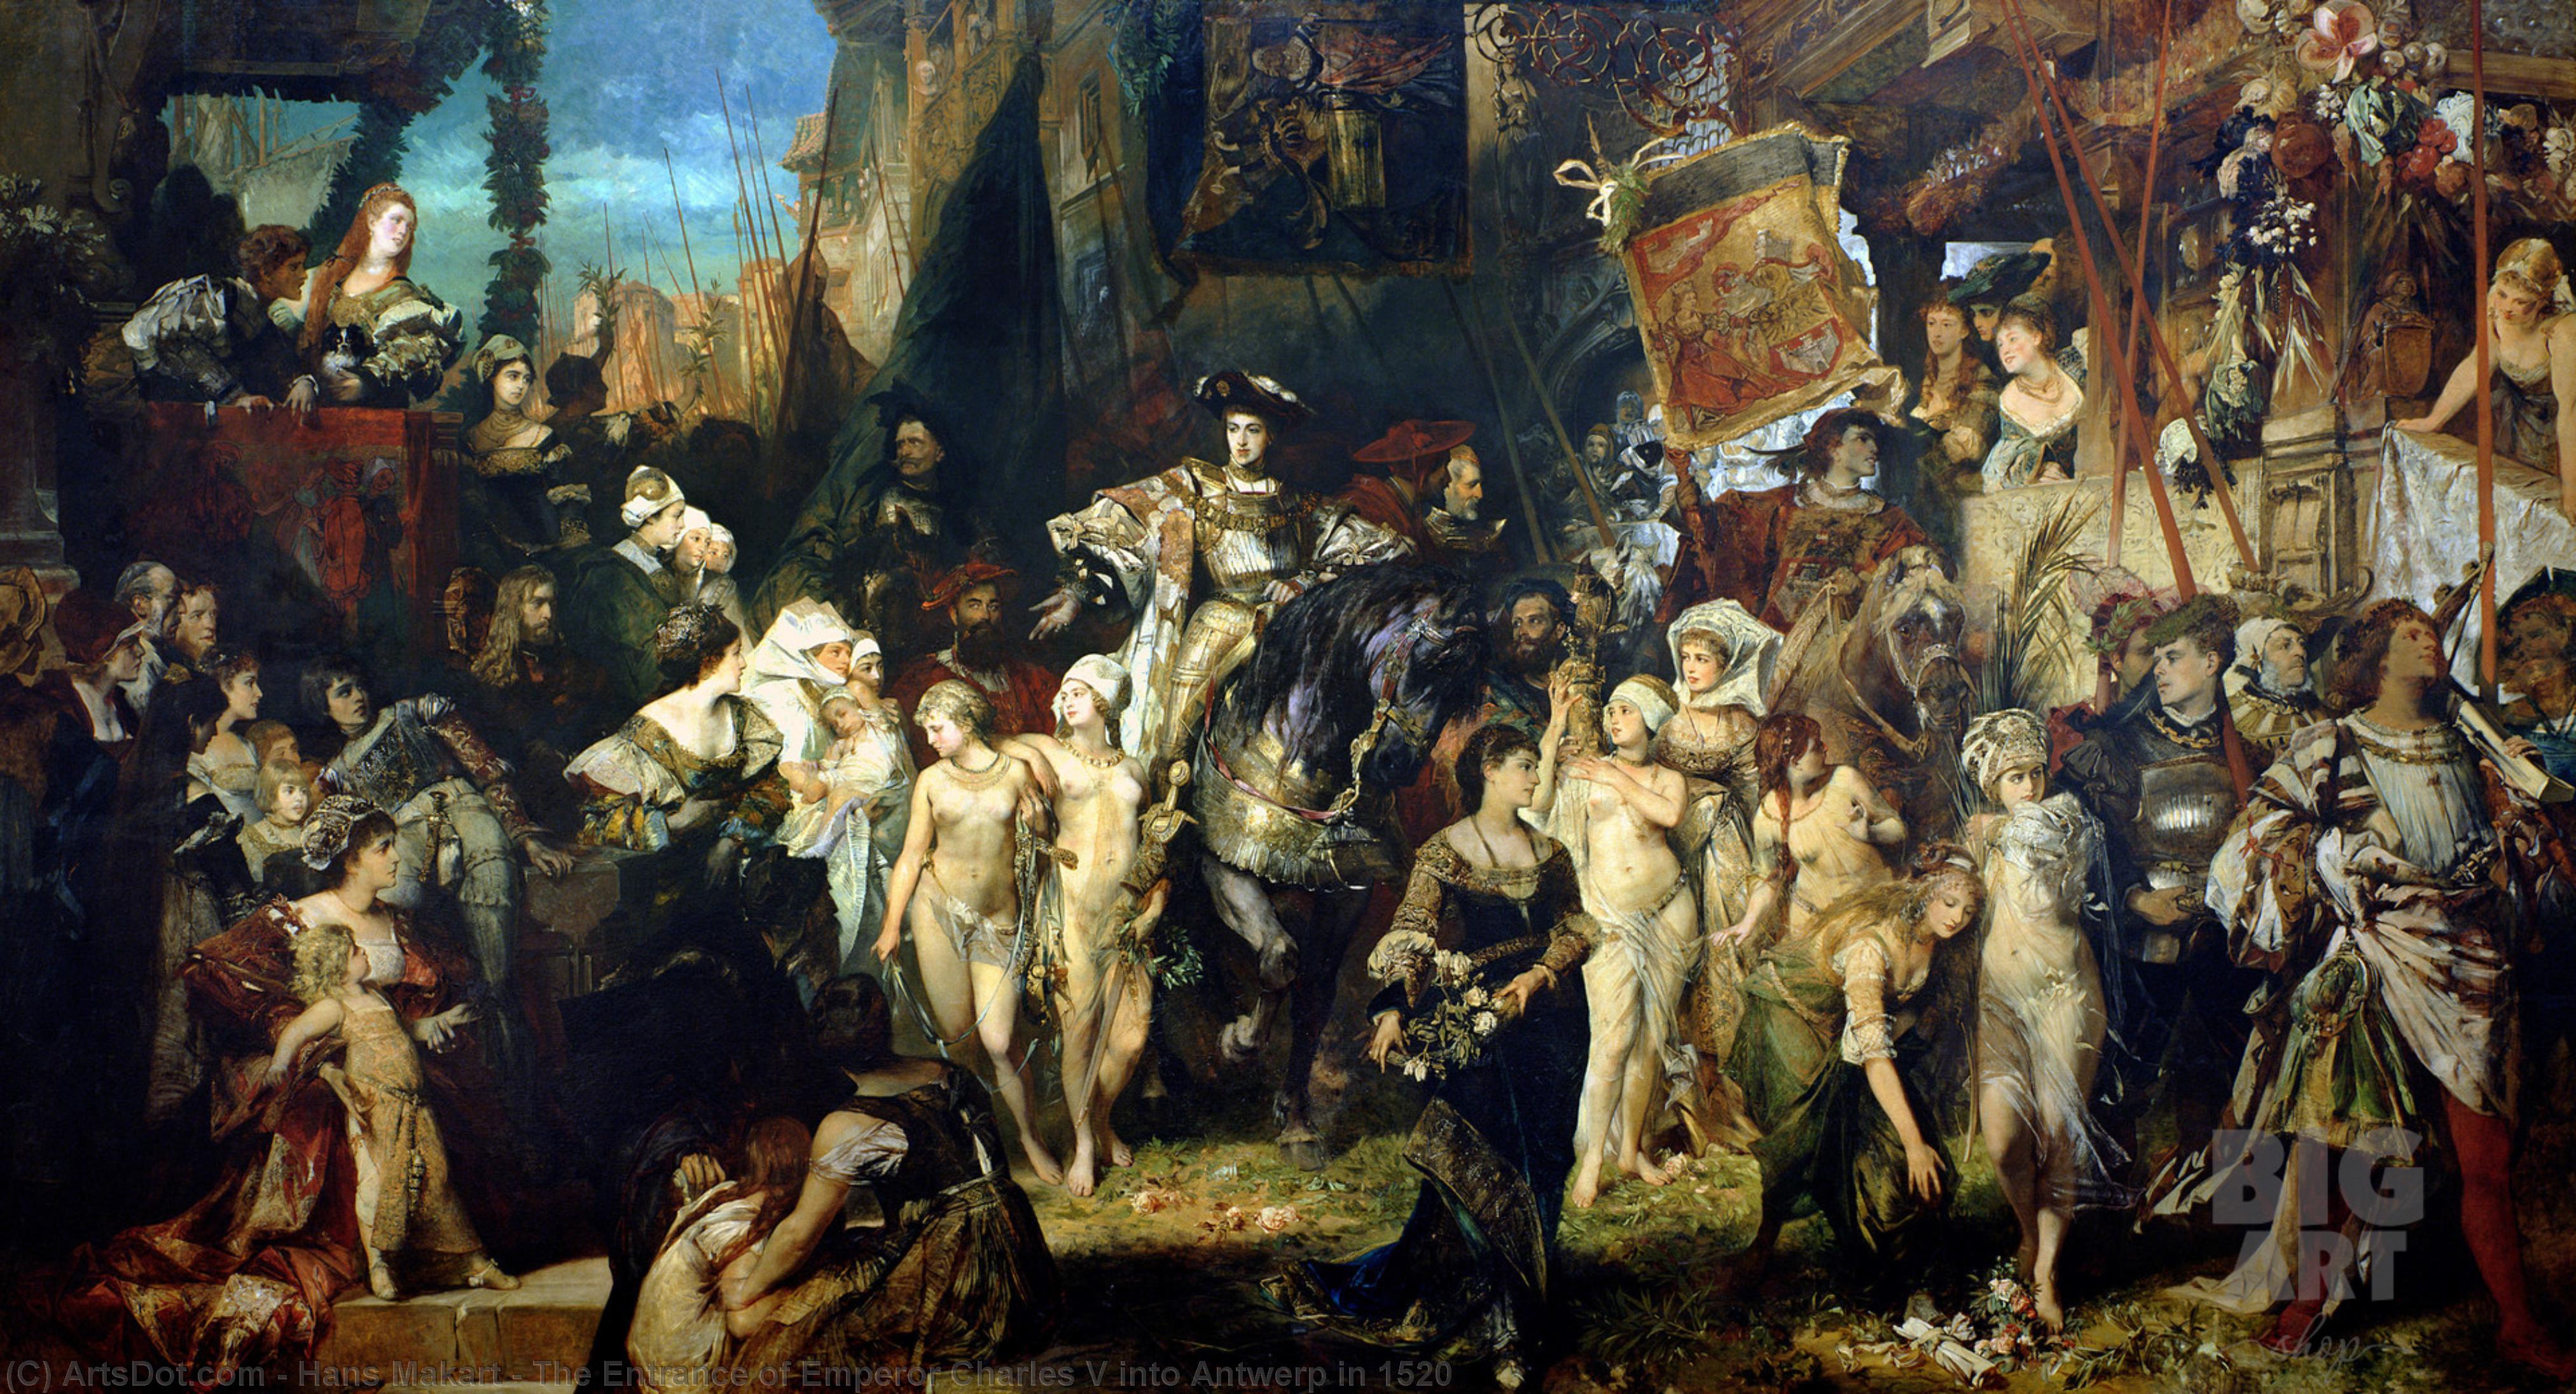 Order Oil Painting Replica The Entrance of Emperor Charles V into Antwerp in 1520, 1878 by Hans Makart (1840-1884, Austria) | ArtsDot.com